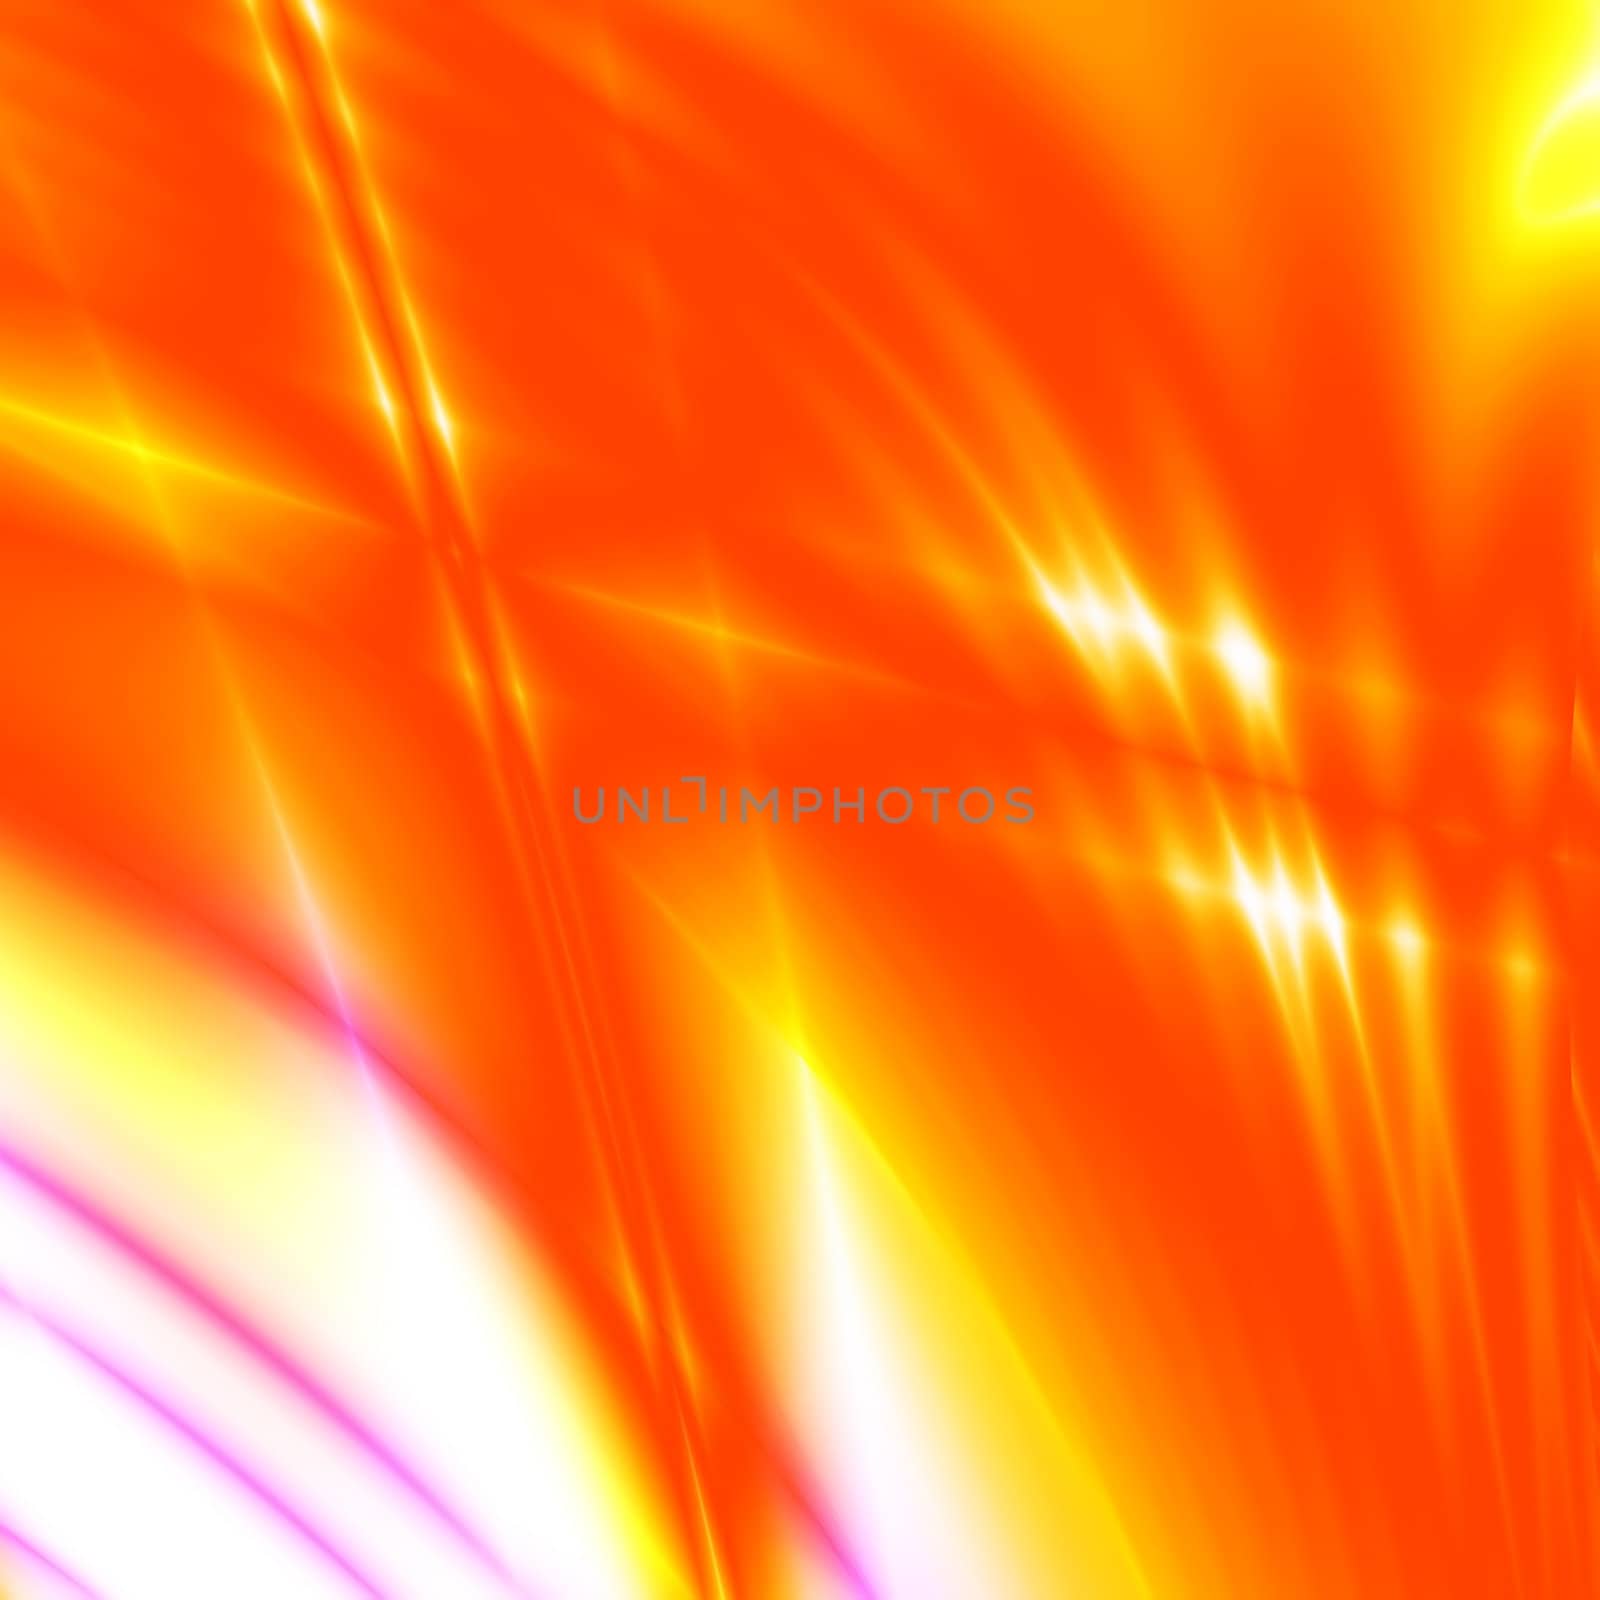 generated red and yellow rays dissecting space form an abstract background